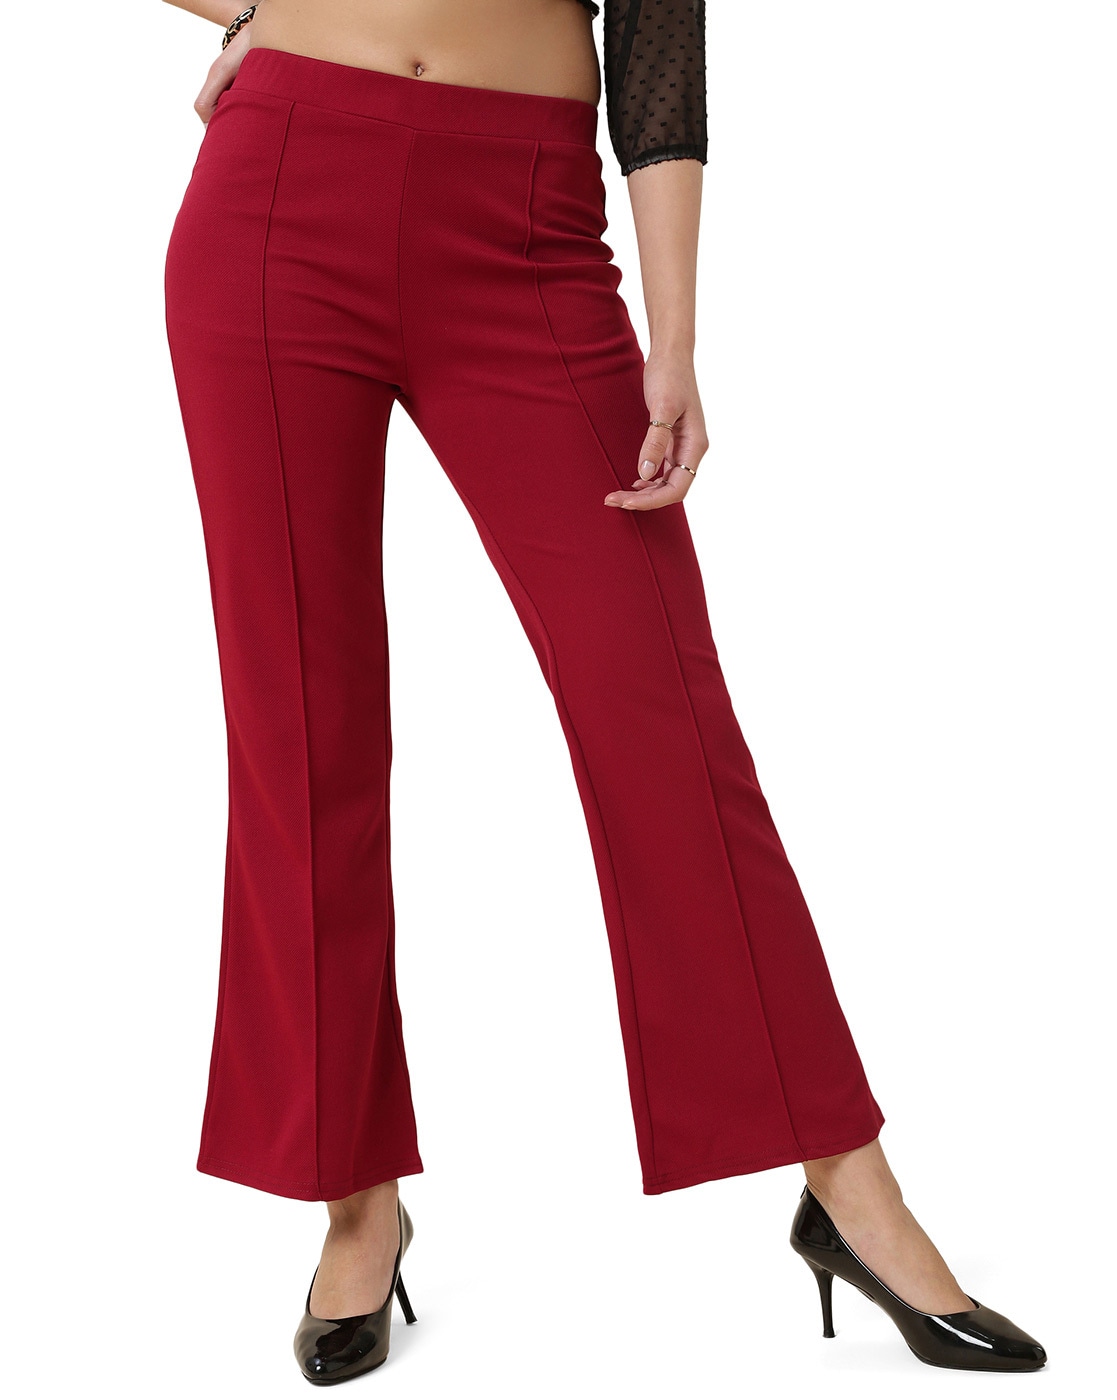 Comfy WideLeg Pants Inspired by Kate Middletons Style